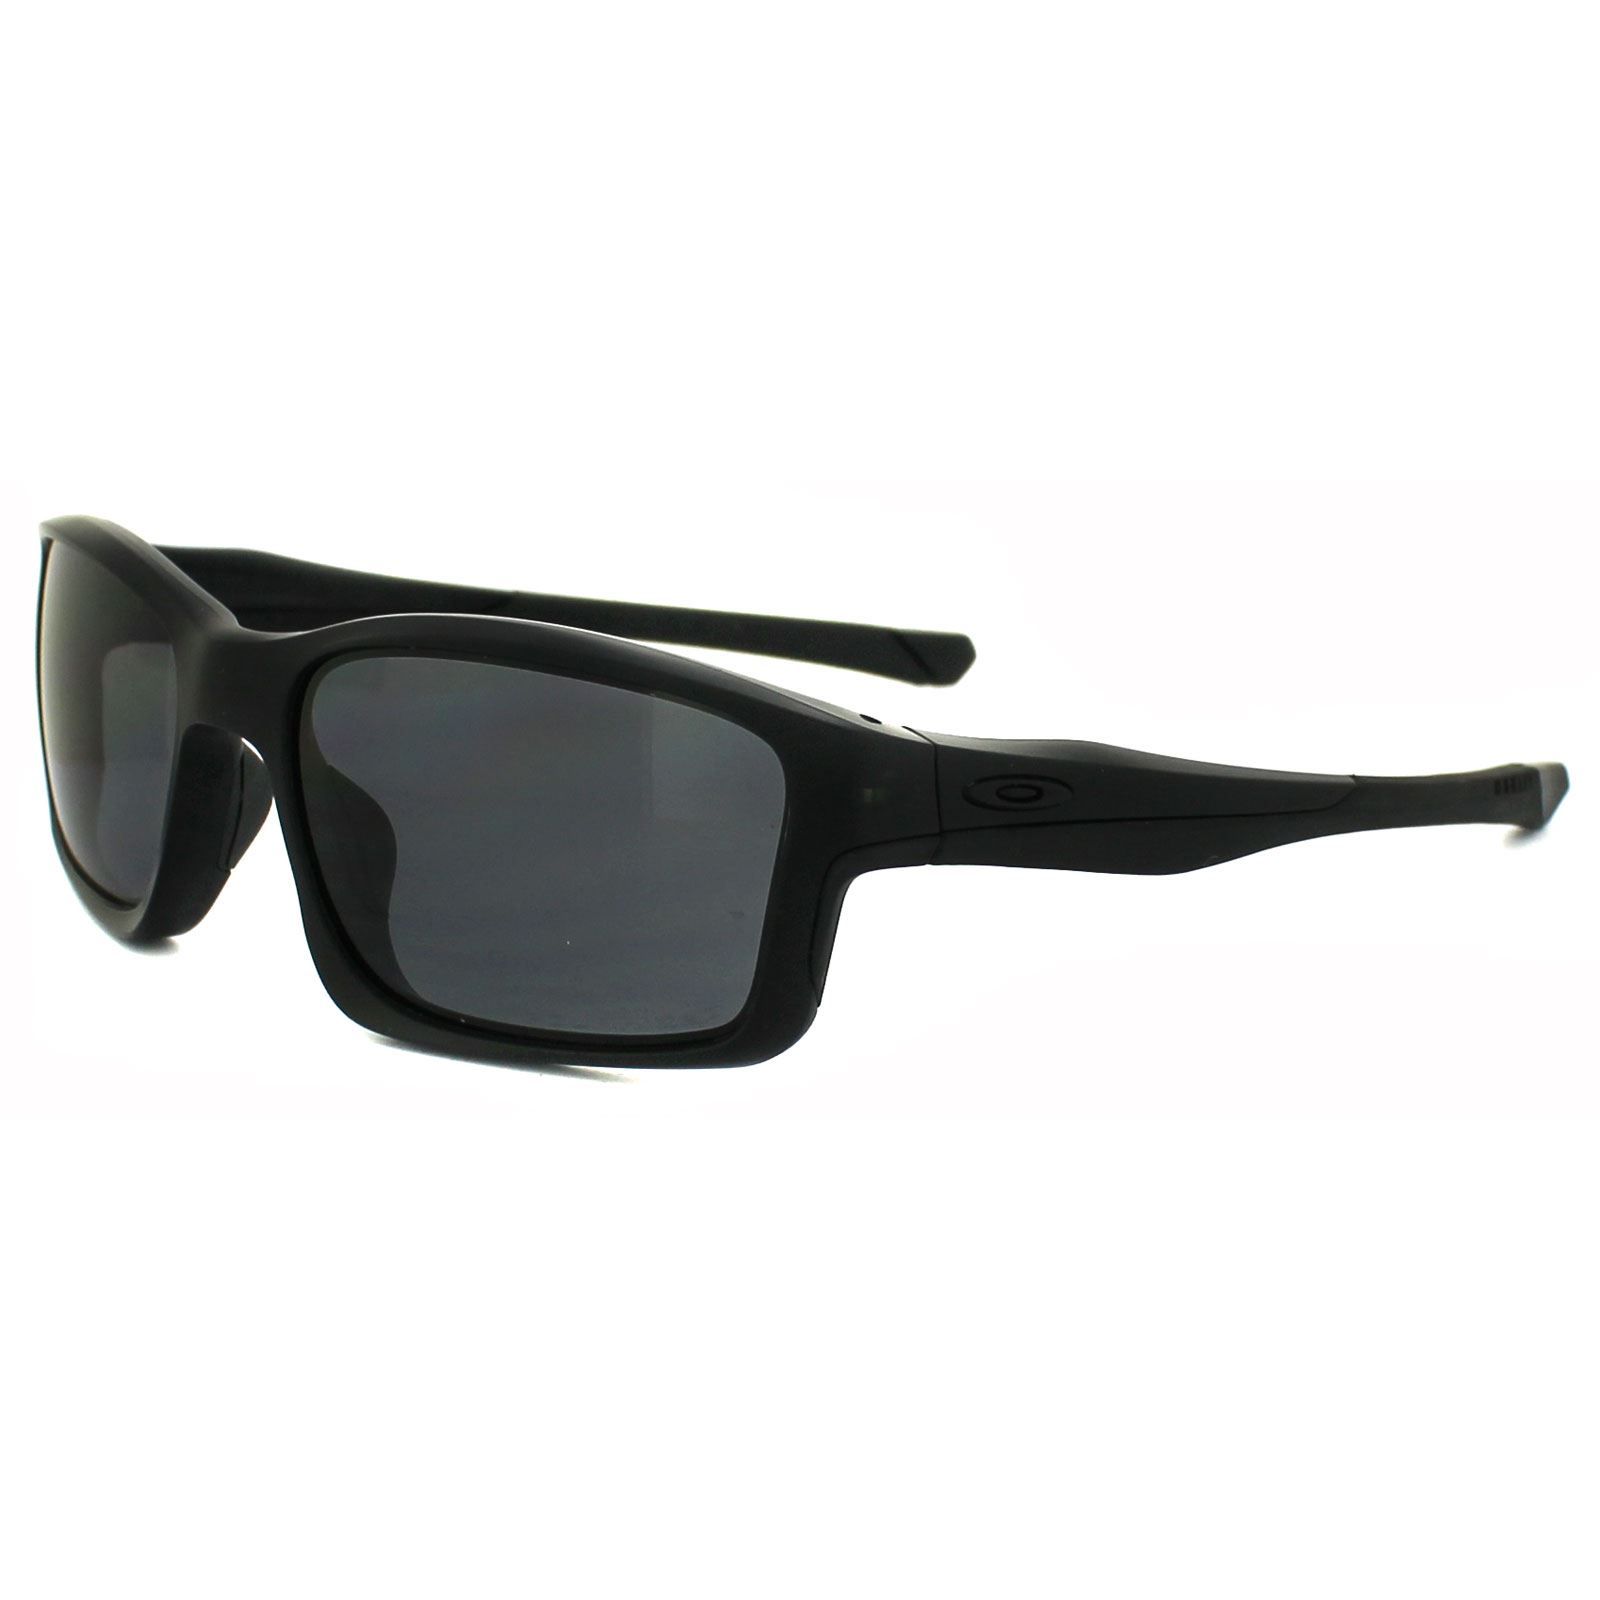 Oakley Sunglasses Chainlink 9247-15 Covert Matt Black Grey Polarized are based on the design of the popular Crosslink prescription frame and provides superior protection and comfort thanks to Oakley's three-point fit. The Unobtanium ear socks and nose pads ensure a secure fit all day, no matter the activity or environment as the grip improves with perspiration.